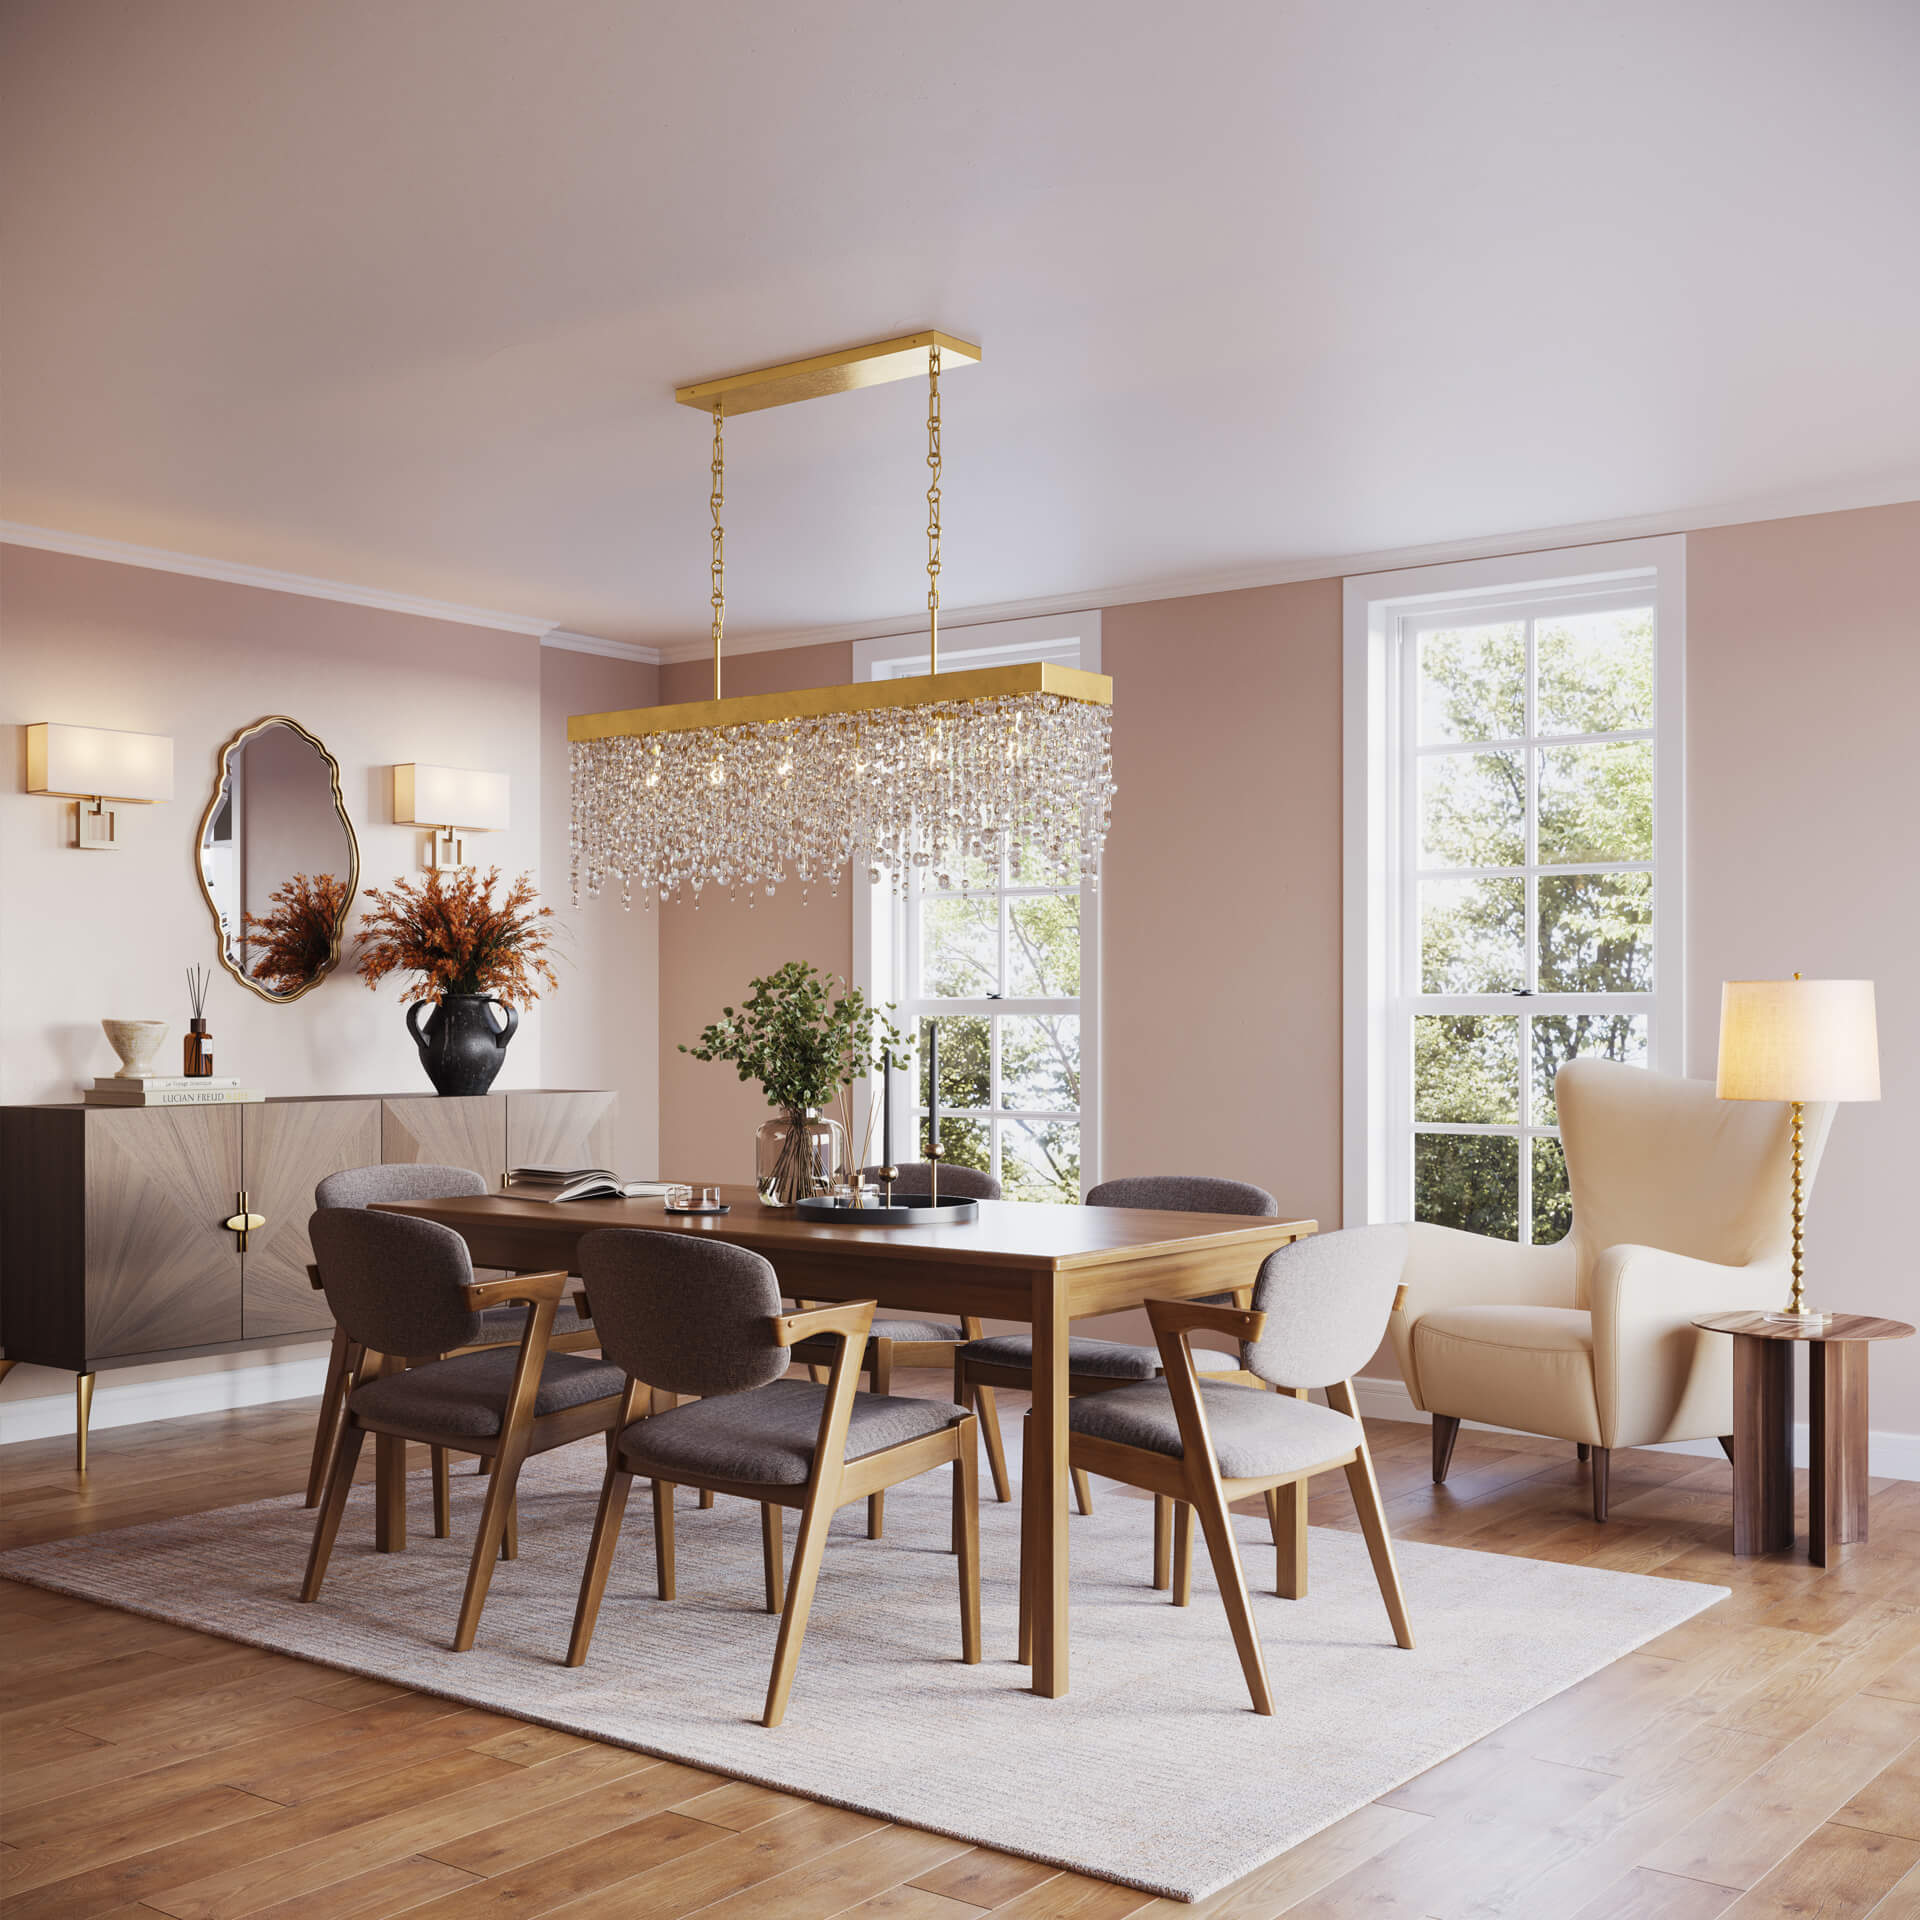 Lifestyle 3D Visualization of Light Fixtures in Dining Room